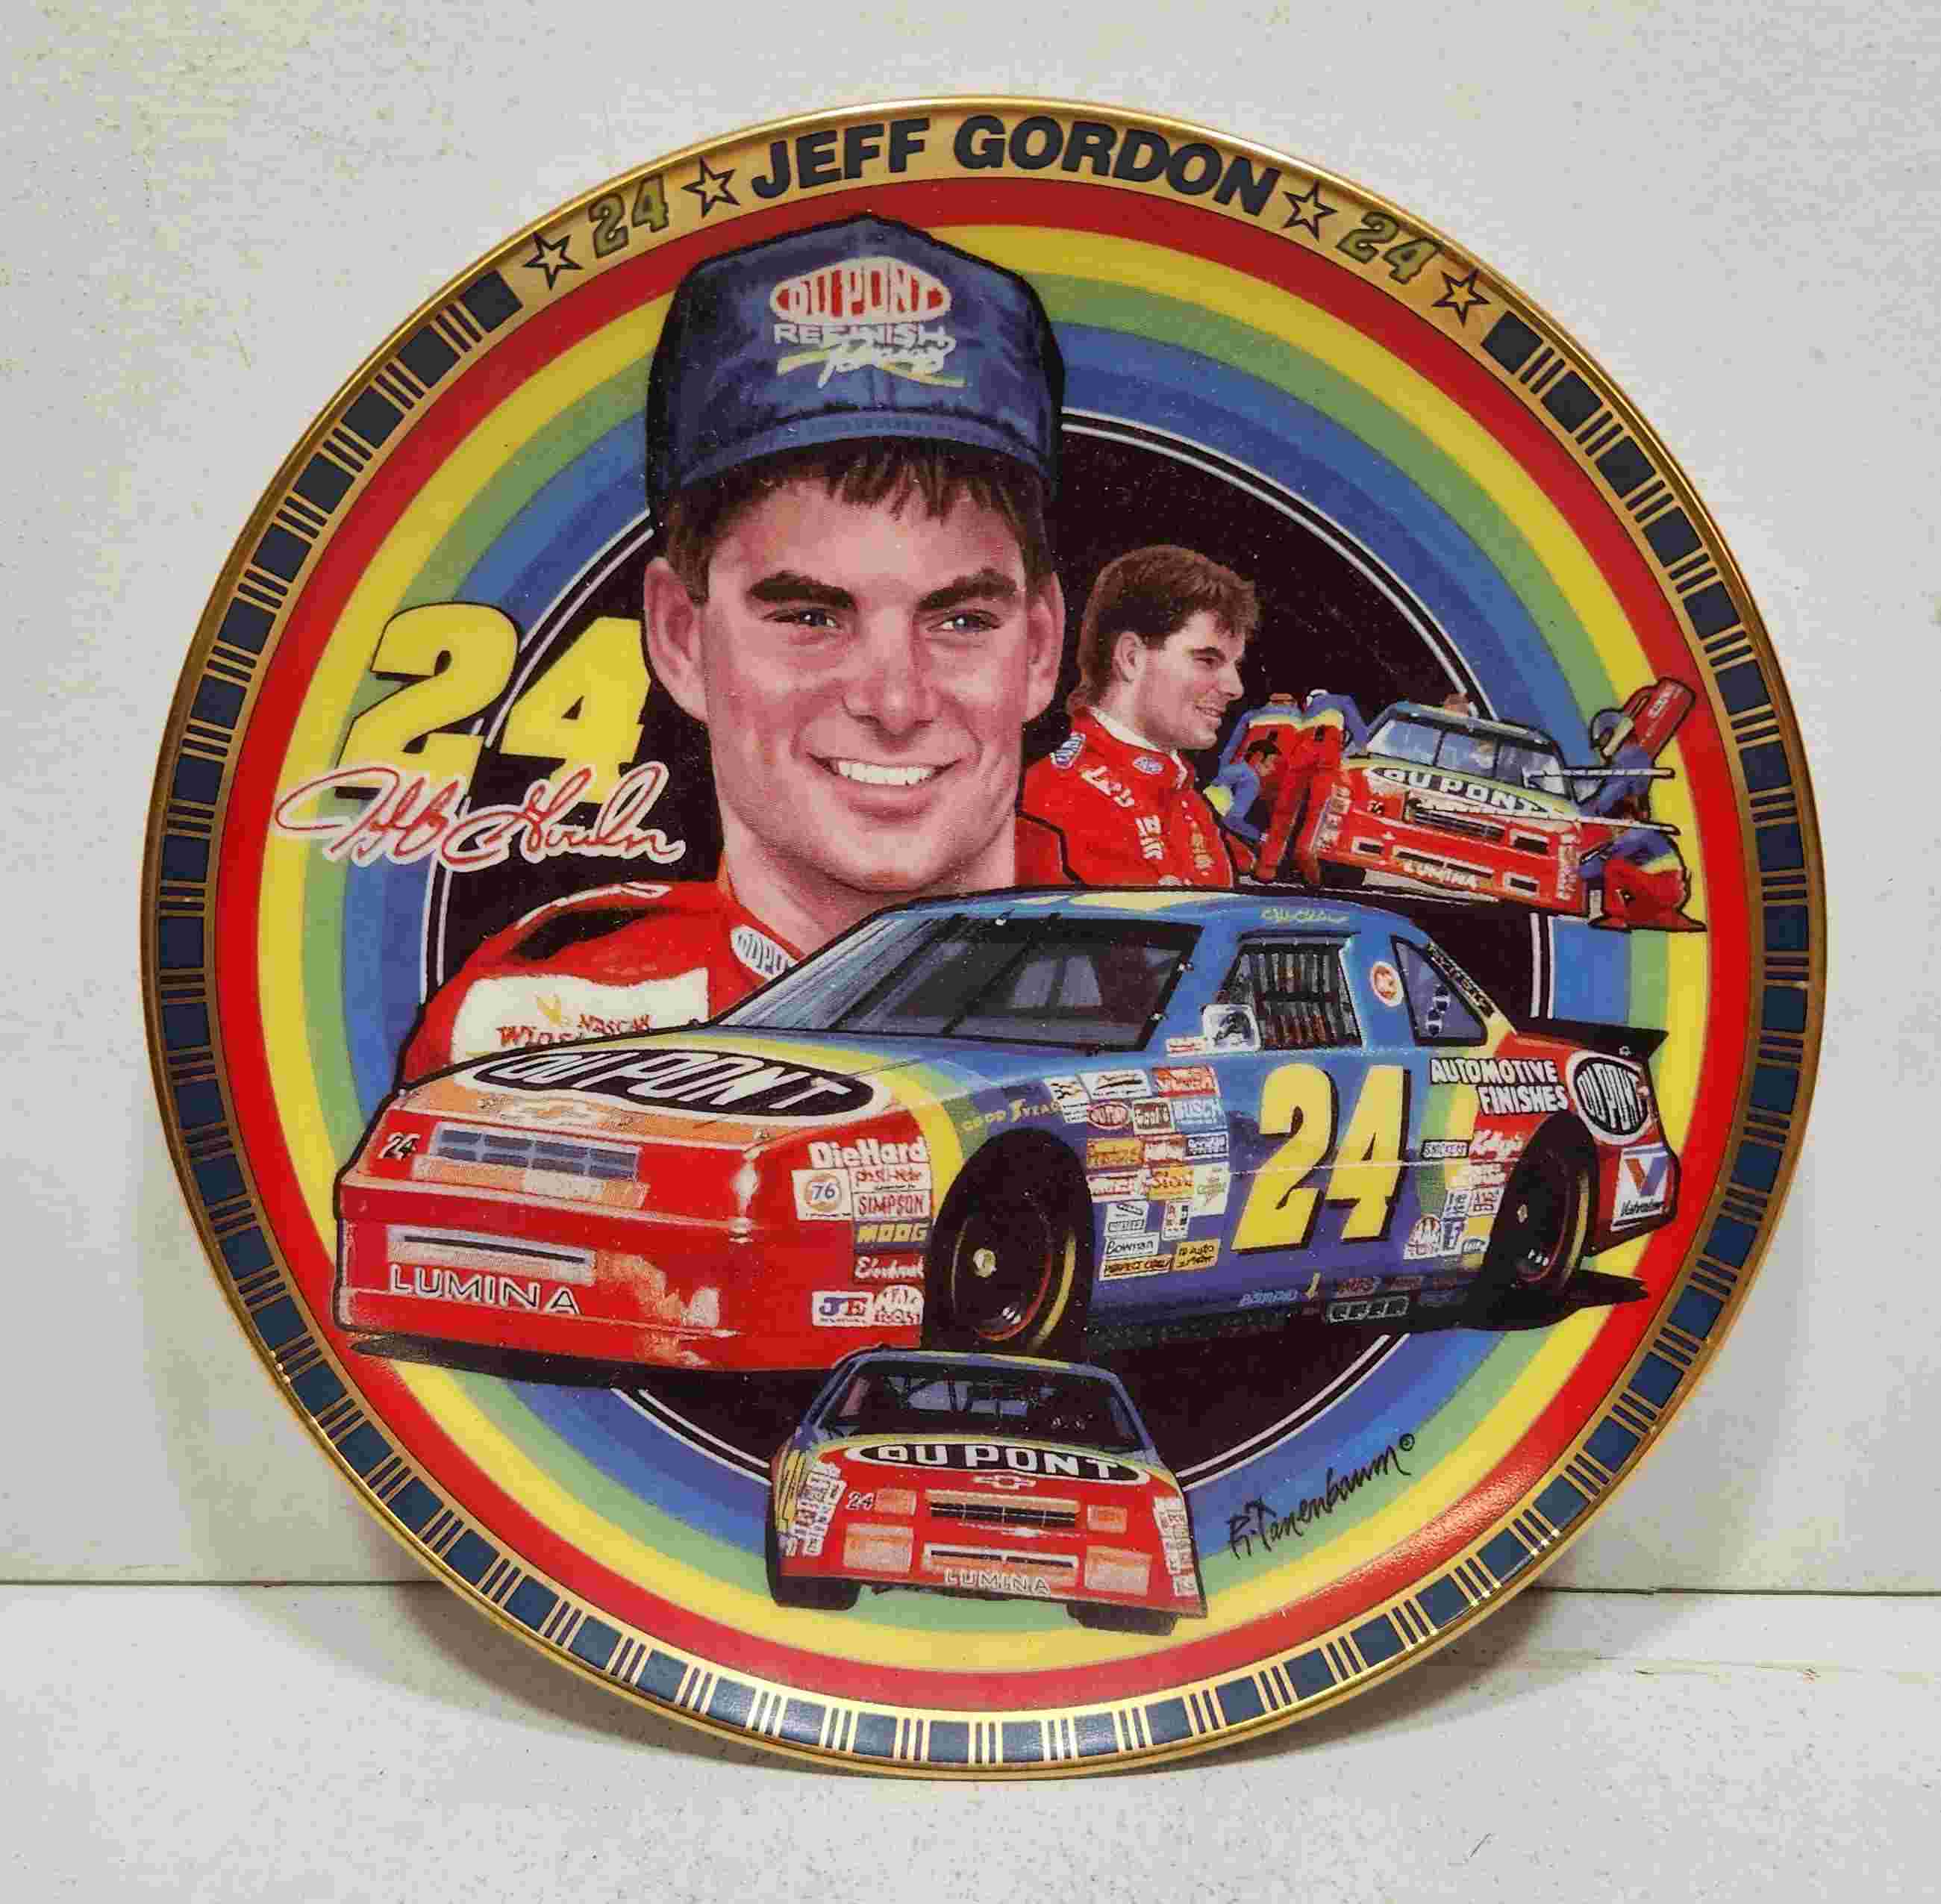 1994 Jeff Gordon Drivers of Victory Lane by The Hamilton Collection